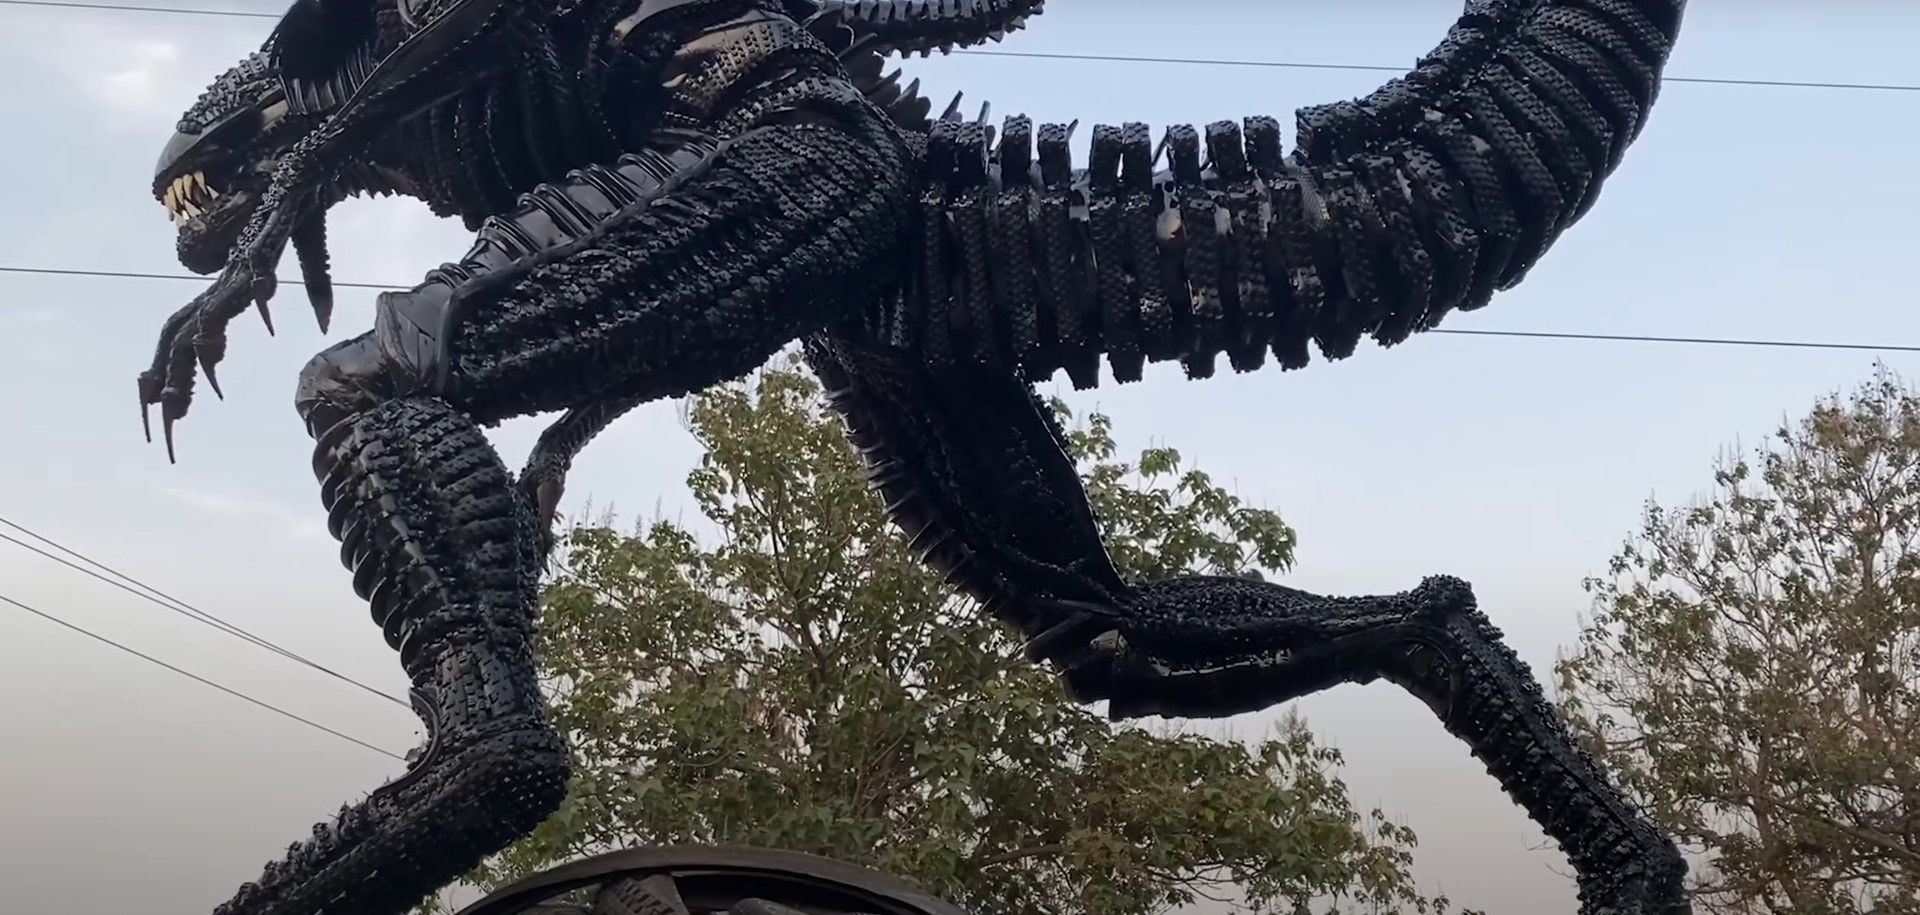 Back view of the Tireman's Alien King sculpture, made using recycled bicycle tires and inner tubes.